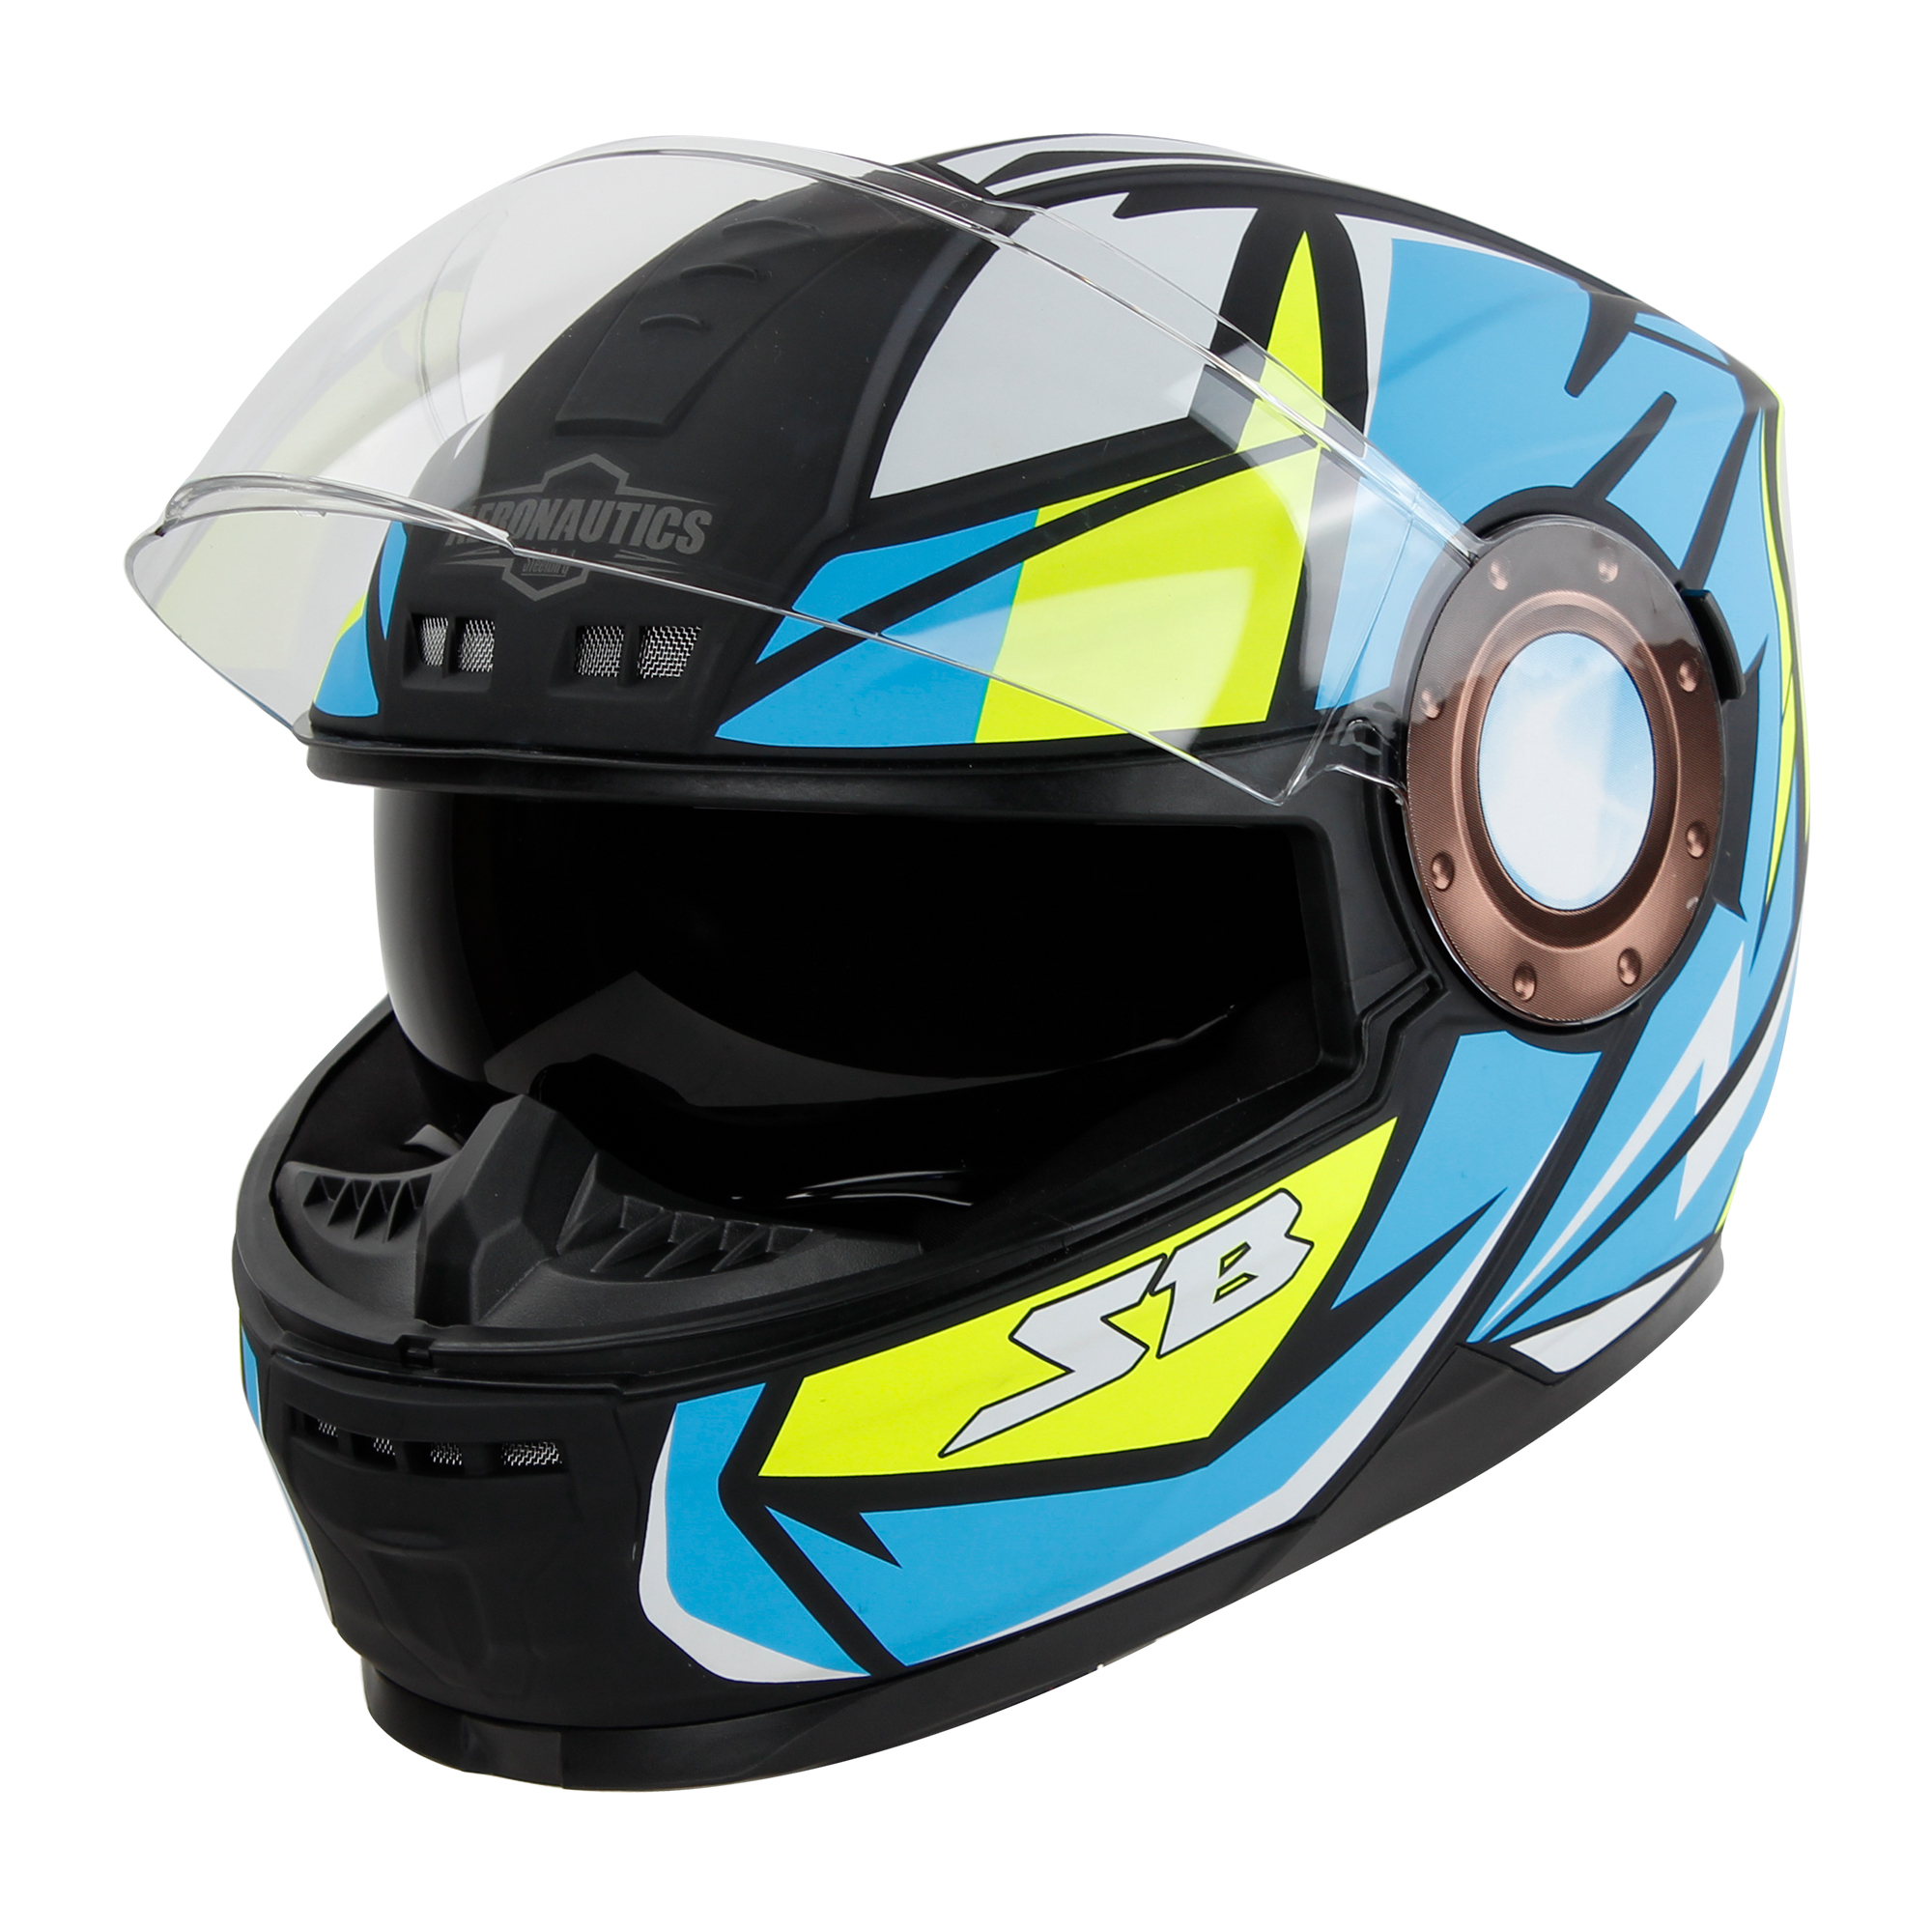 Steelbird SBH-40 Decode ISI Certified Full Face Graphic Helmet For Men And Women With Inner Sun Shield (Glossy Black Neon)